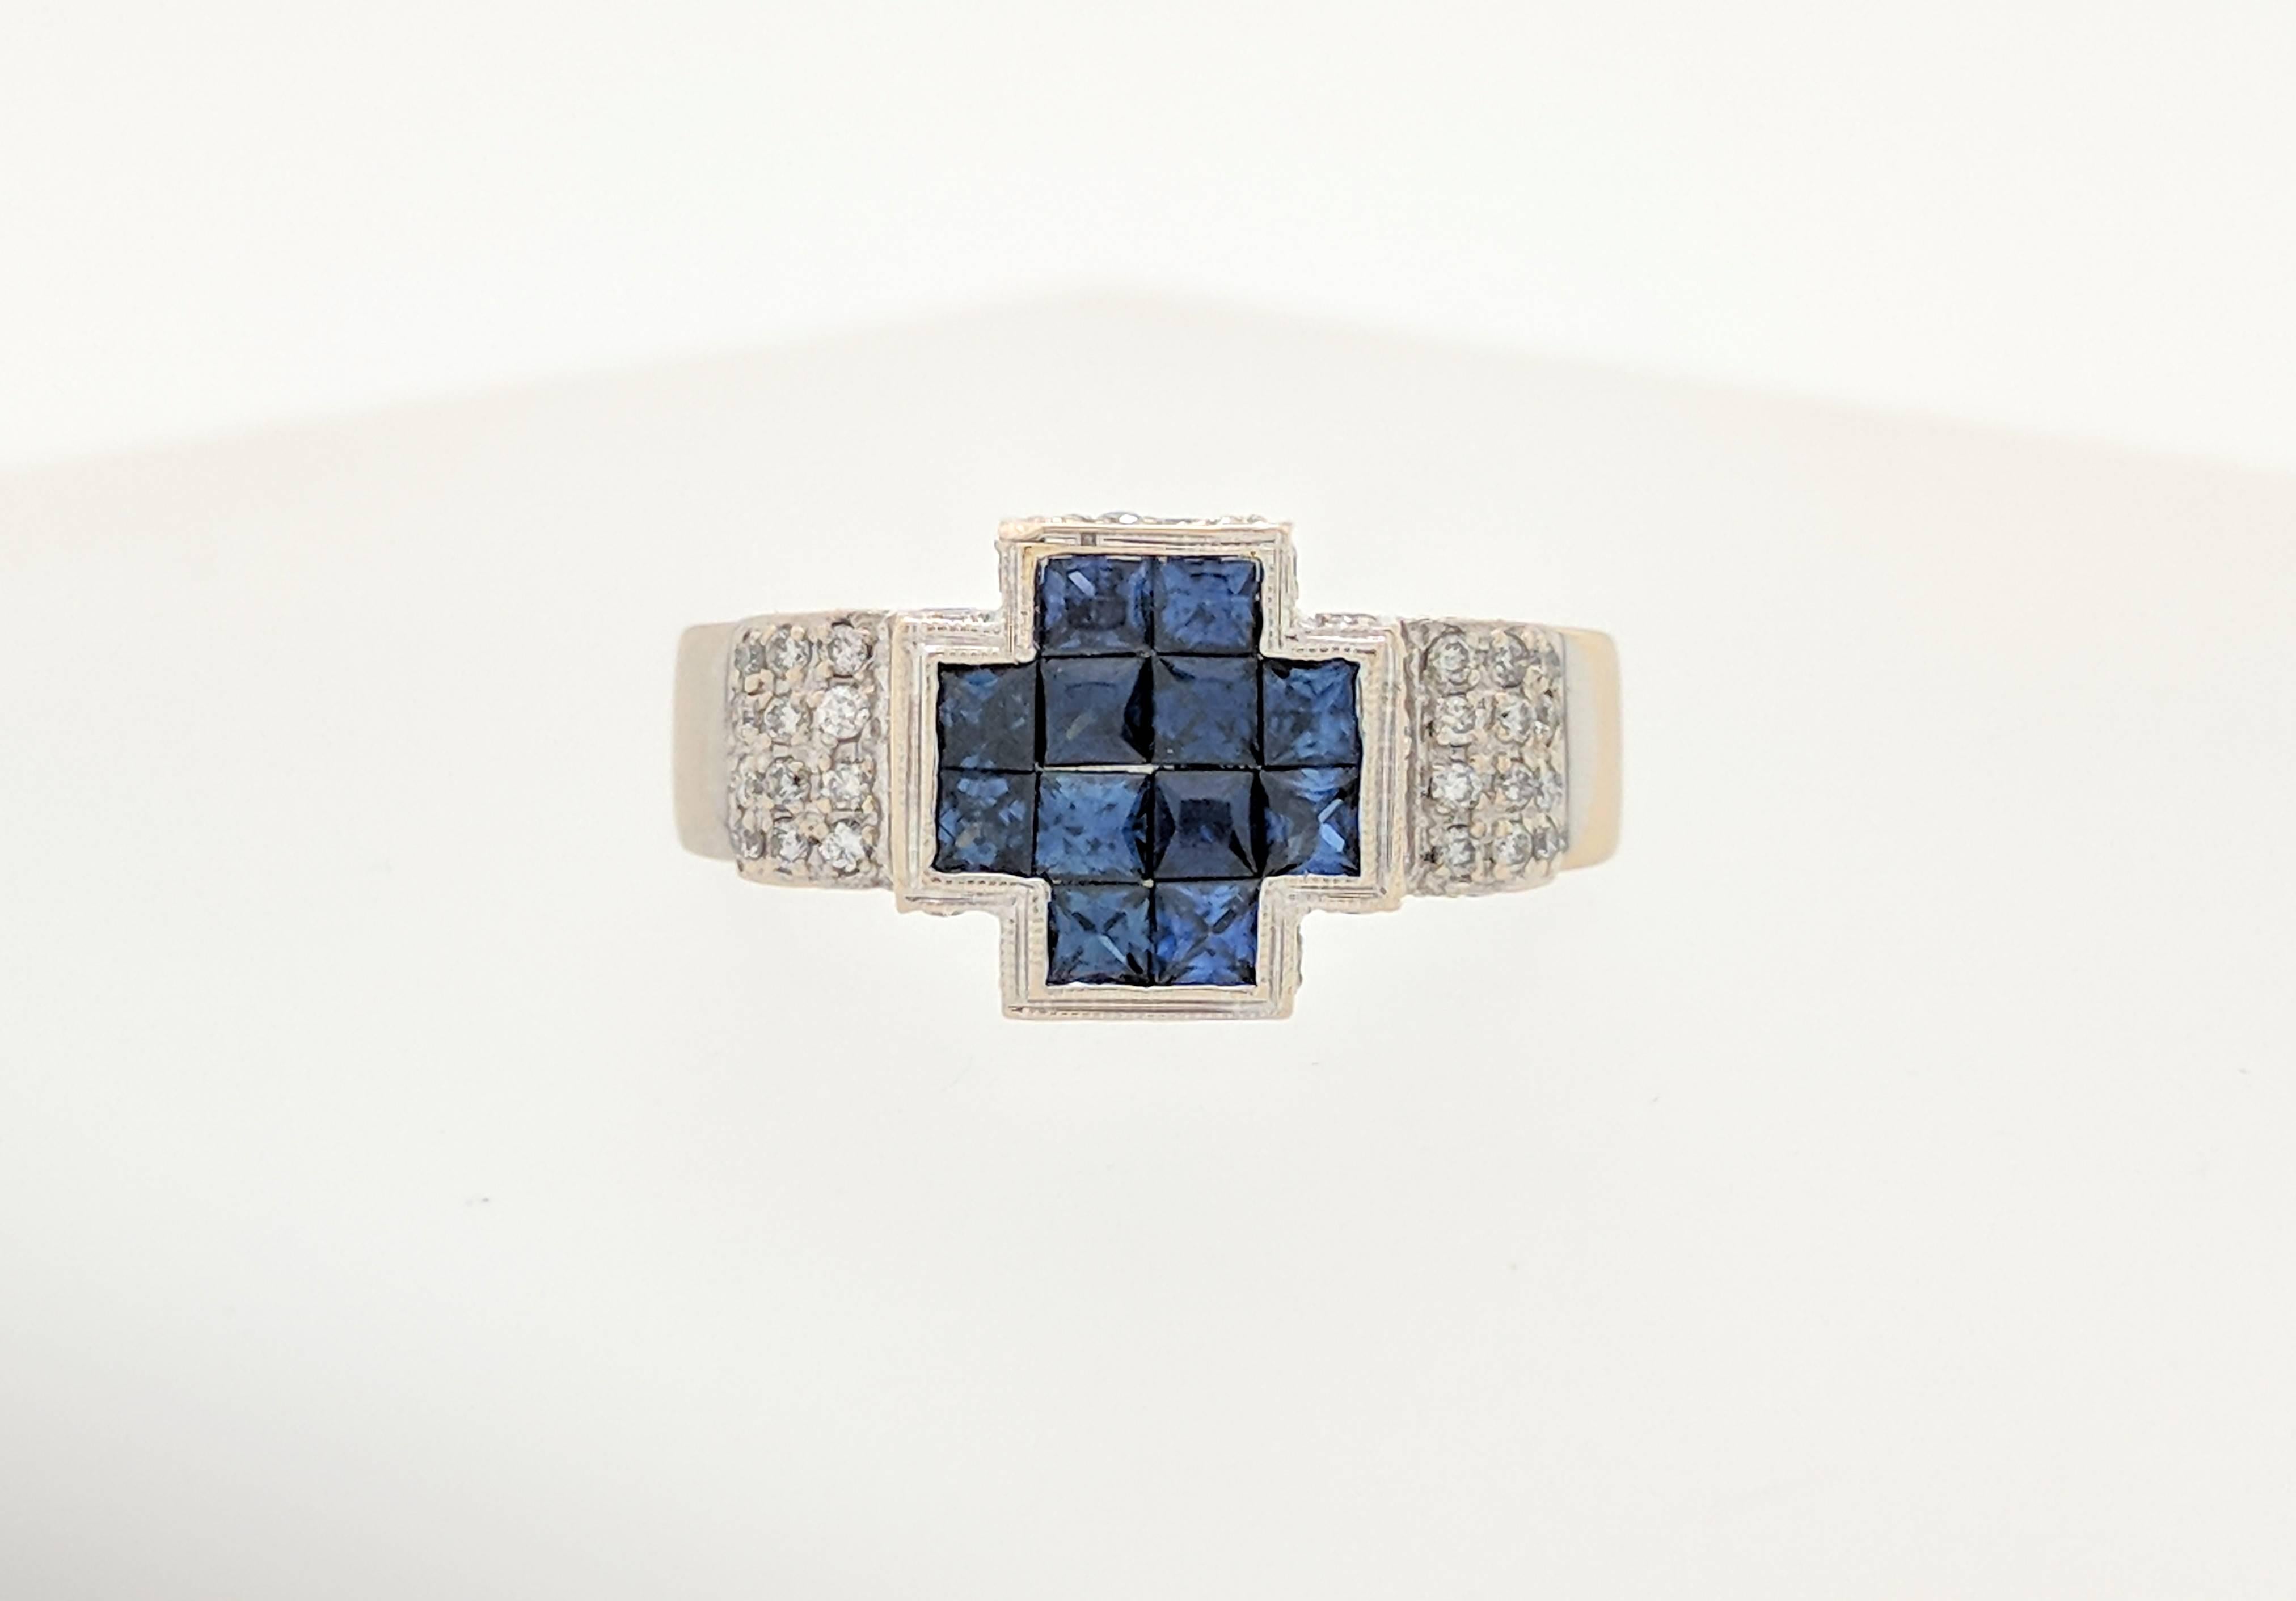  18K White Gold Illusion Set Sapphire & Diamond Cross Ring

You are viewing a beautiful ladies illusion set sapphire & diamond cross ring. This ring is crafted from 18k white gold and weighs 10.7 grams. It features twelve 12 .15ct natural princess